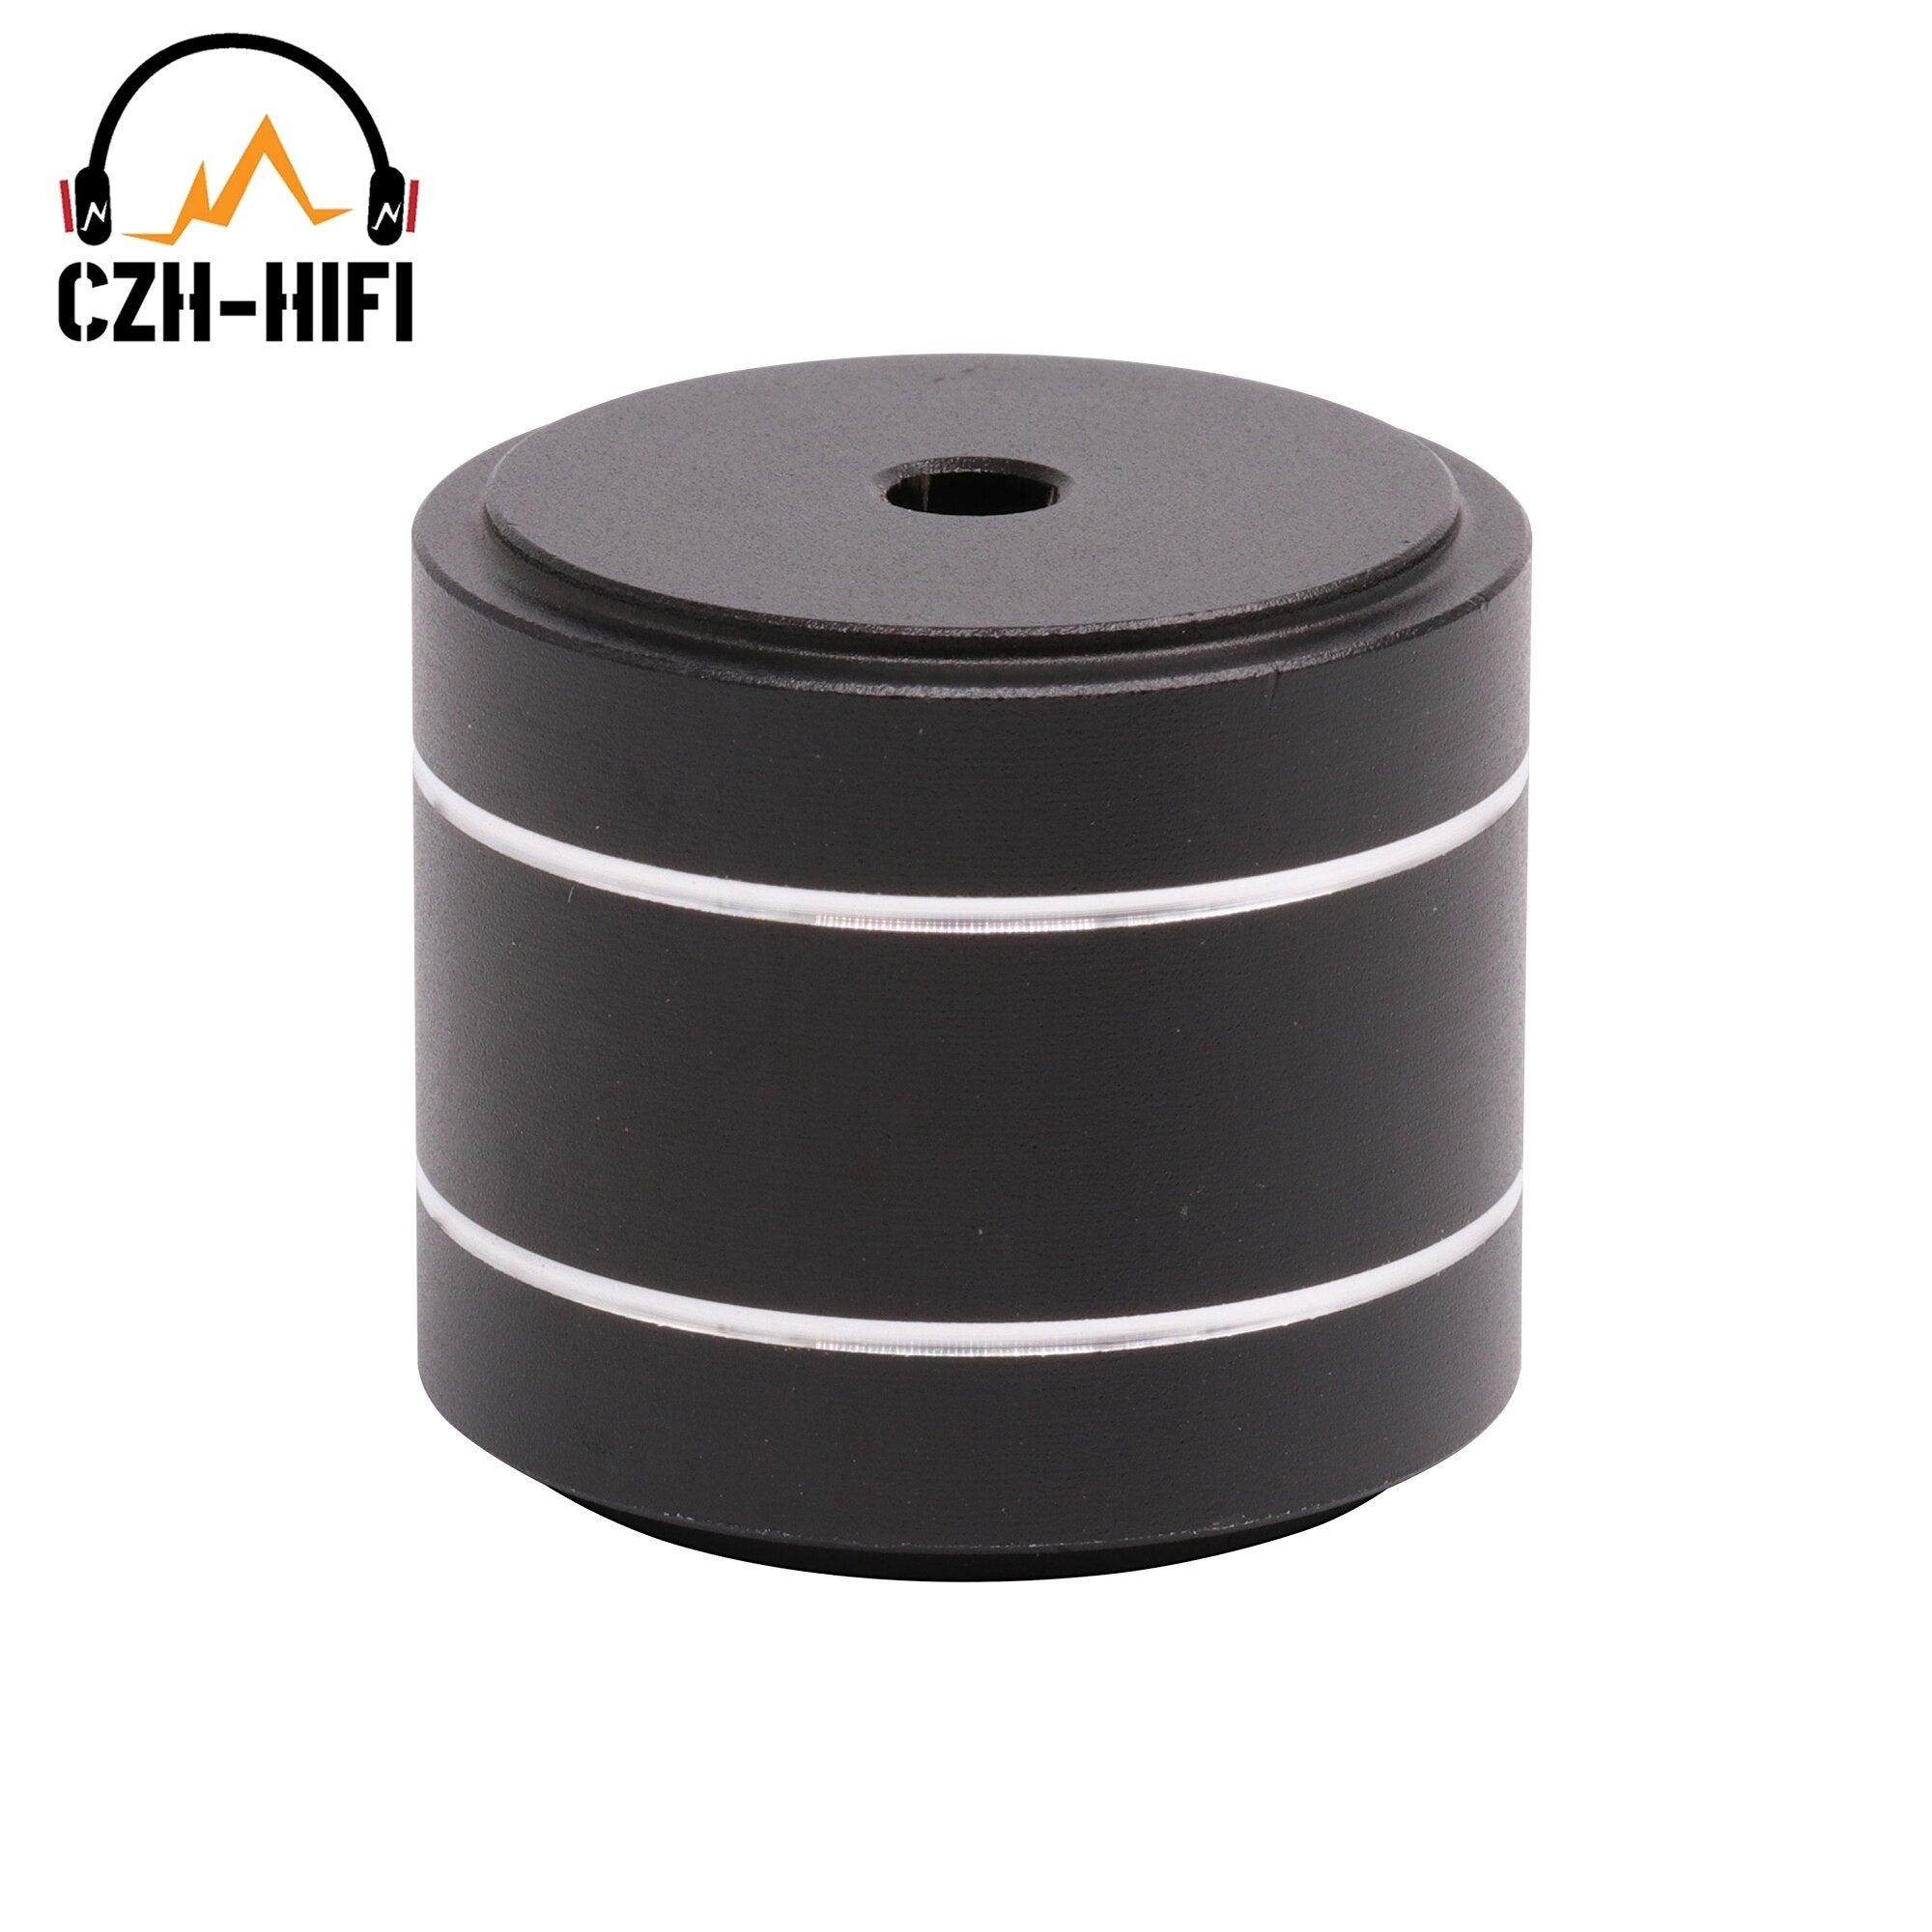 30x25mm CNC Machined Solid Aluminum Isolation Stand Base Feet Pad for Subwoofer Audio Speaker Turntable DAC Amplifier PC CD DIY